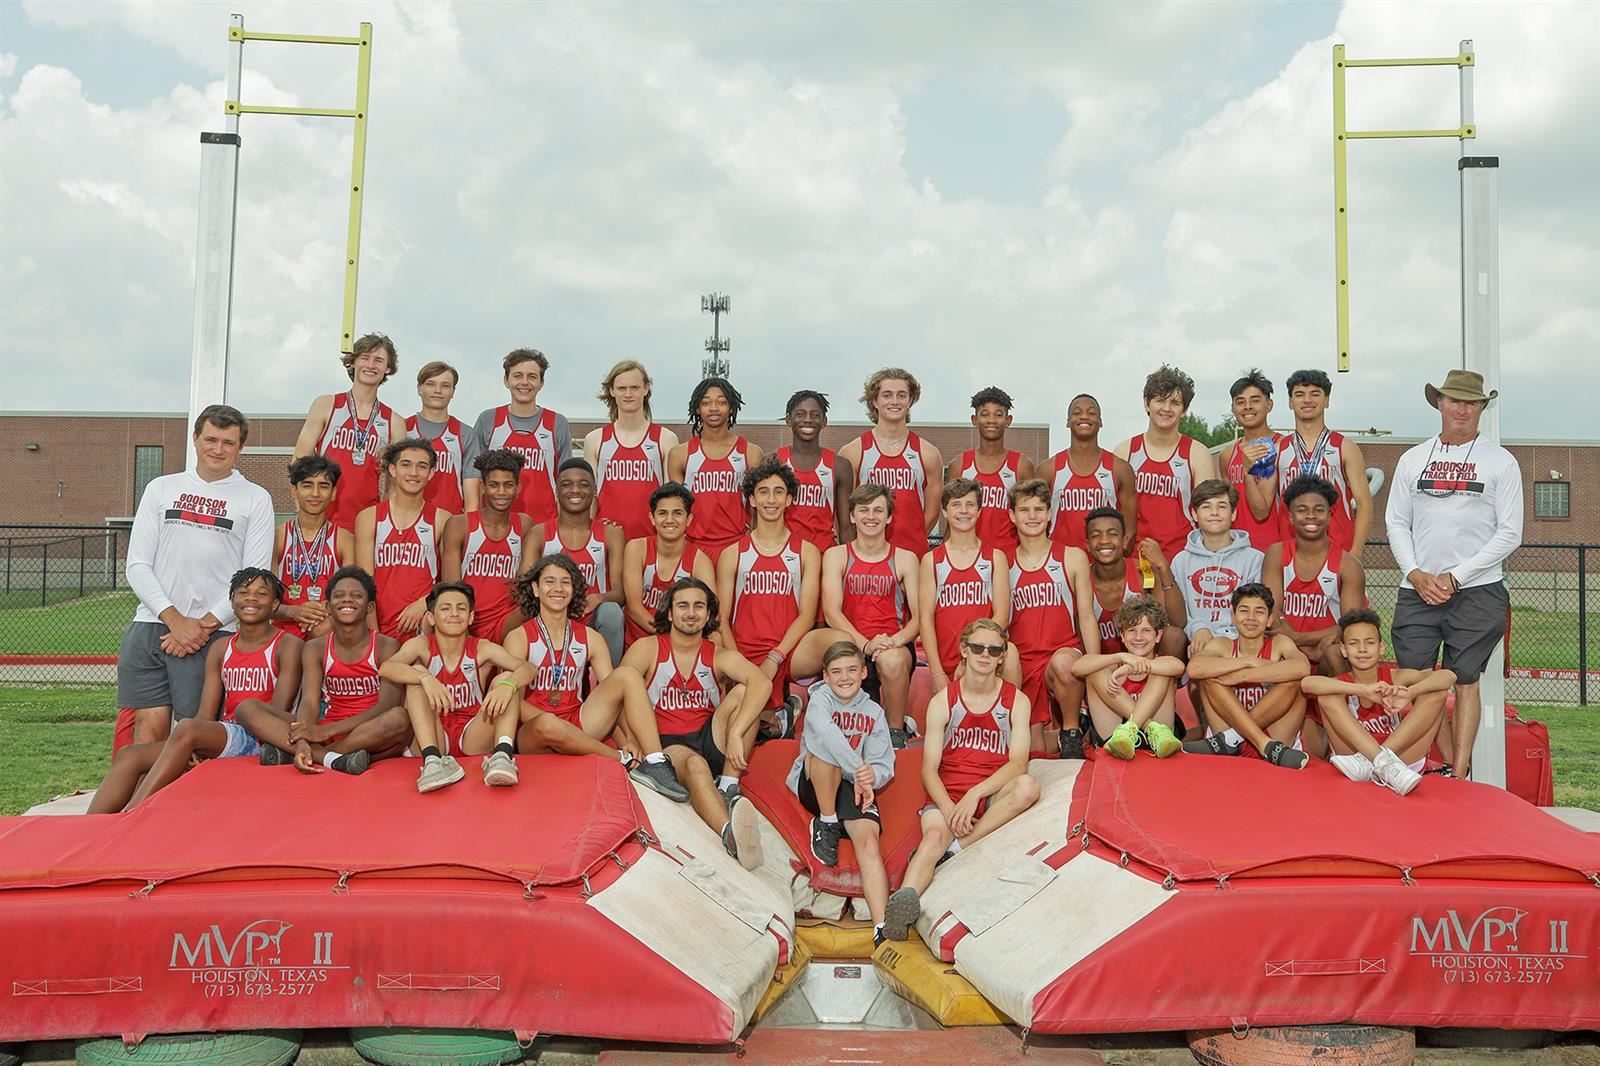 Goodson Middle School won the eighth grade boys’ track and field team title with 137 points at the District Meet.